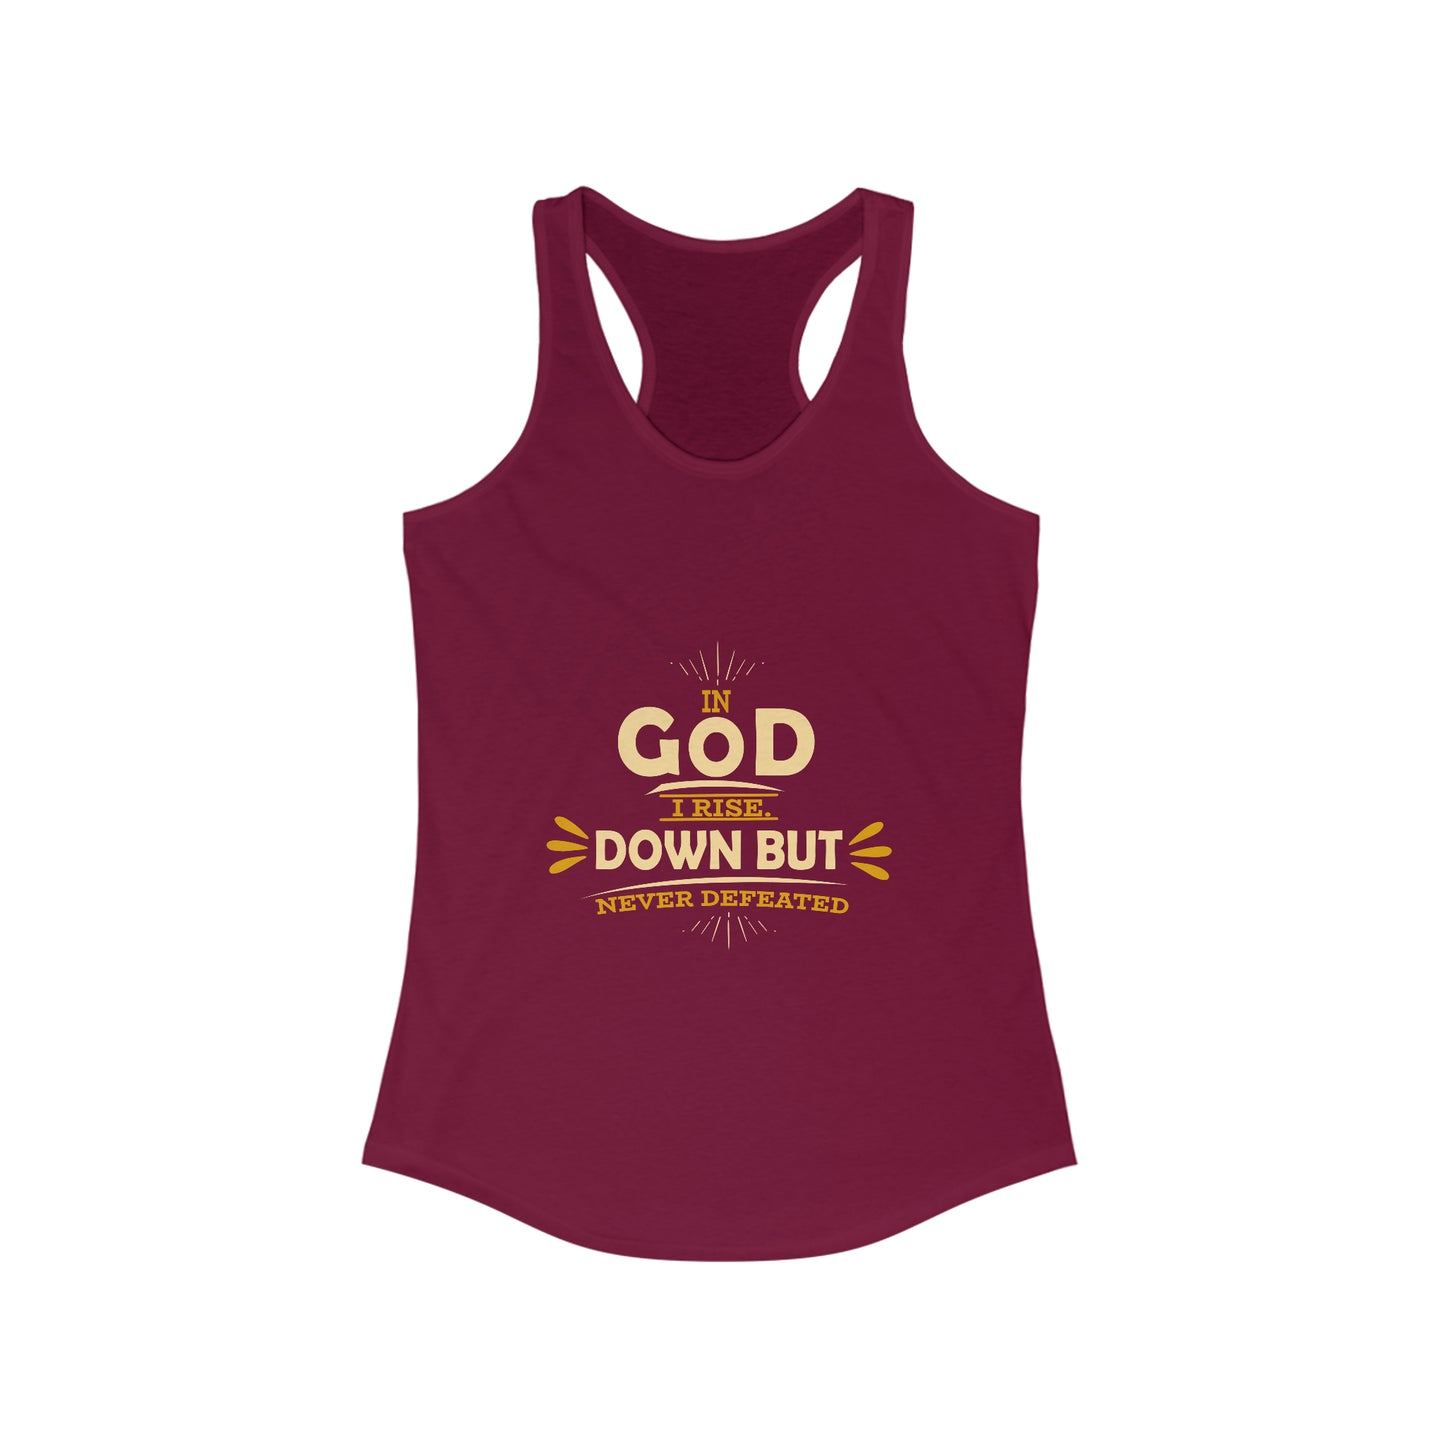 In God I Rise Down But Never Defeated  Slim Fit Tank-top